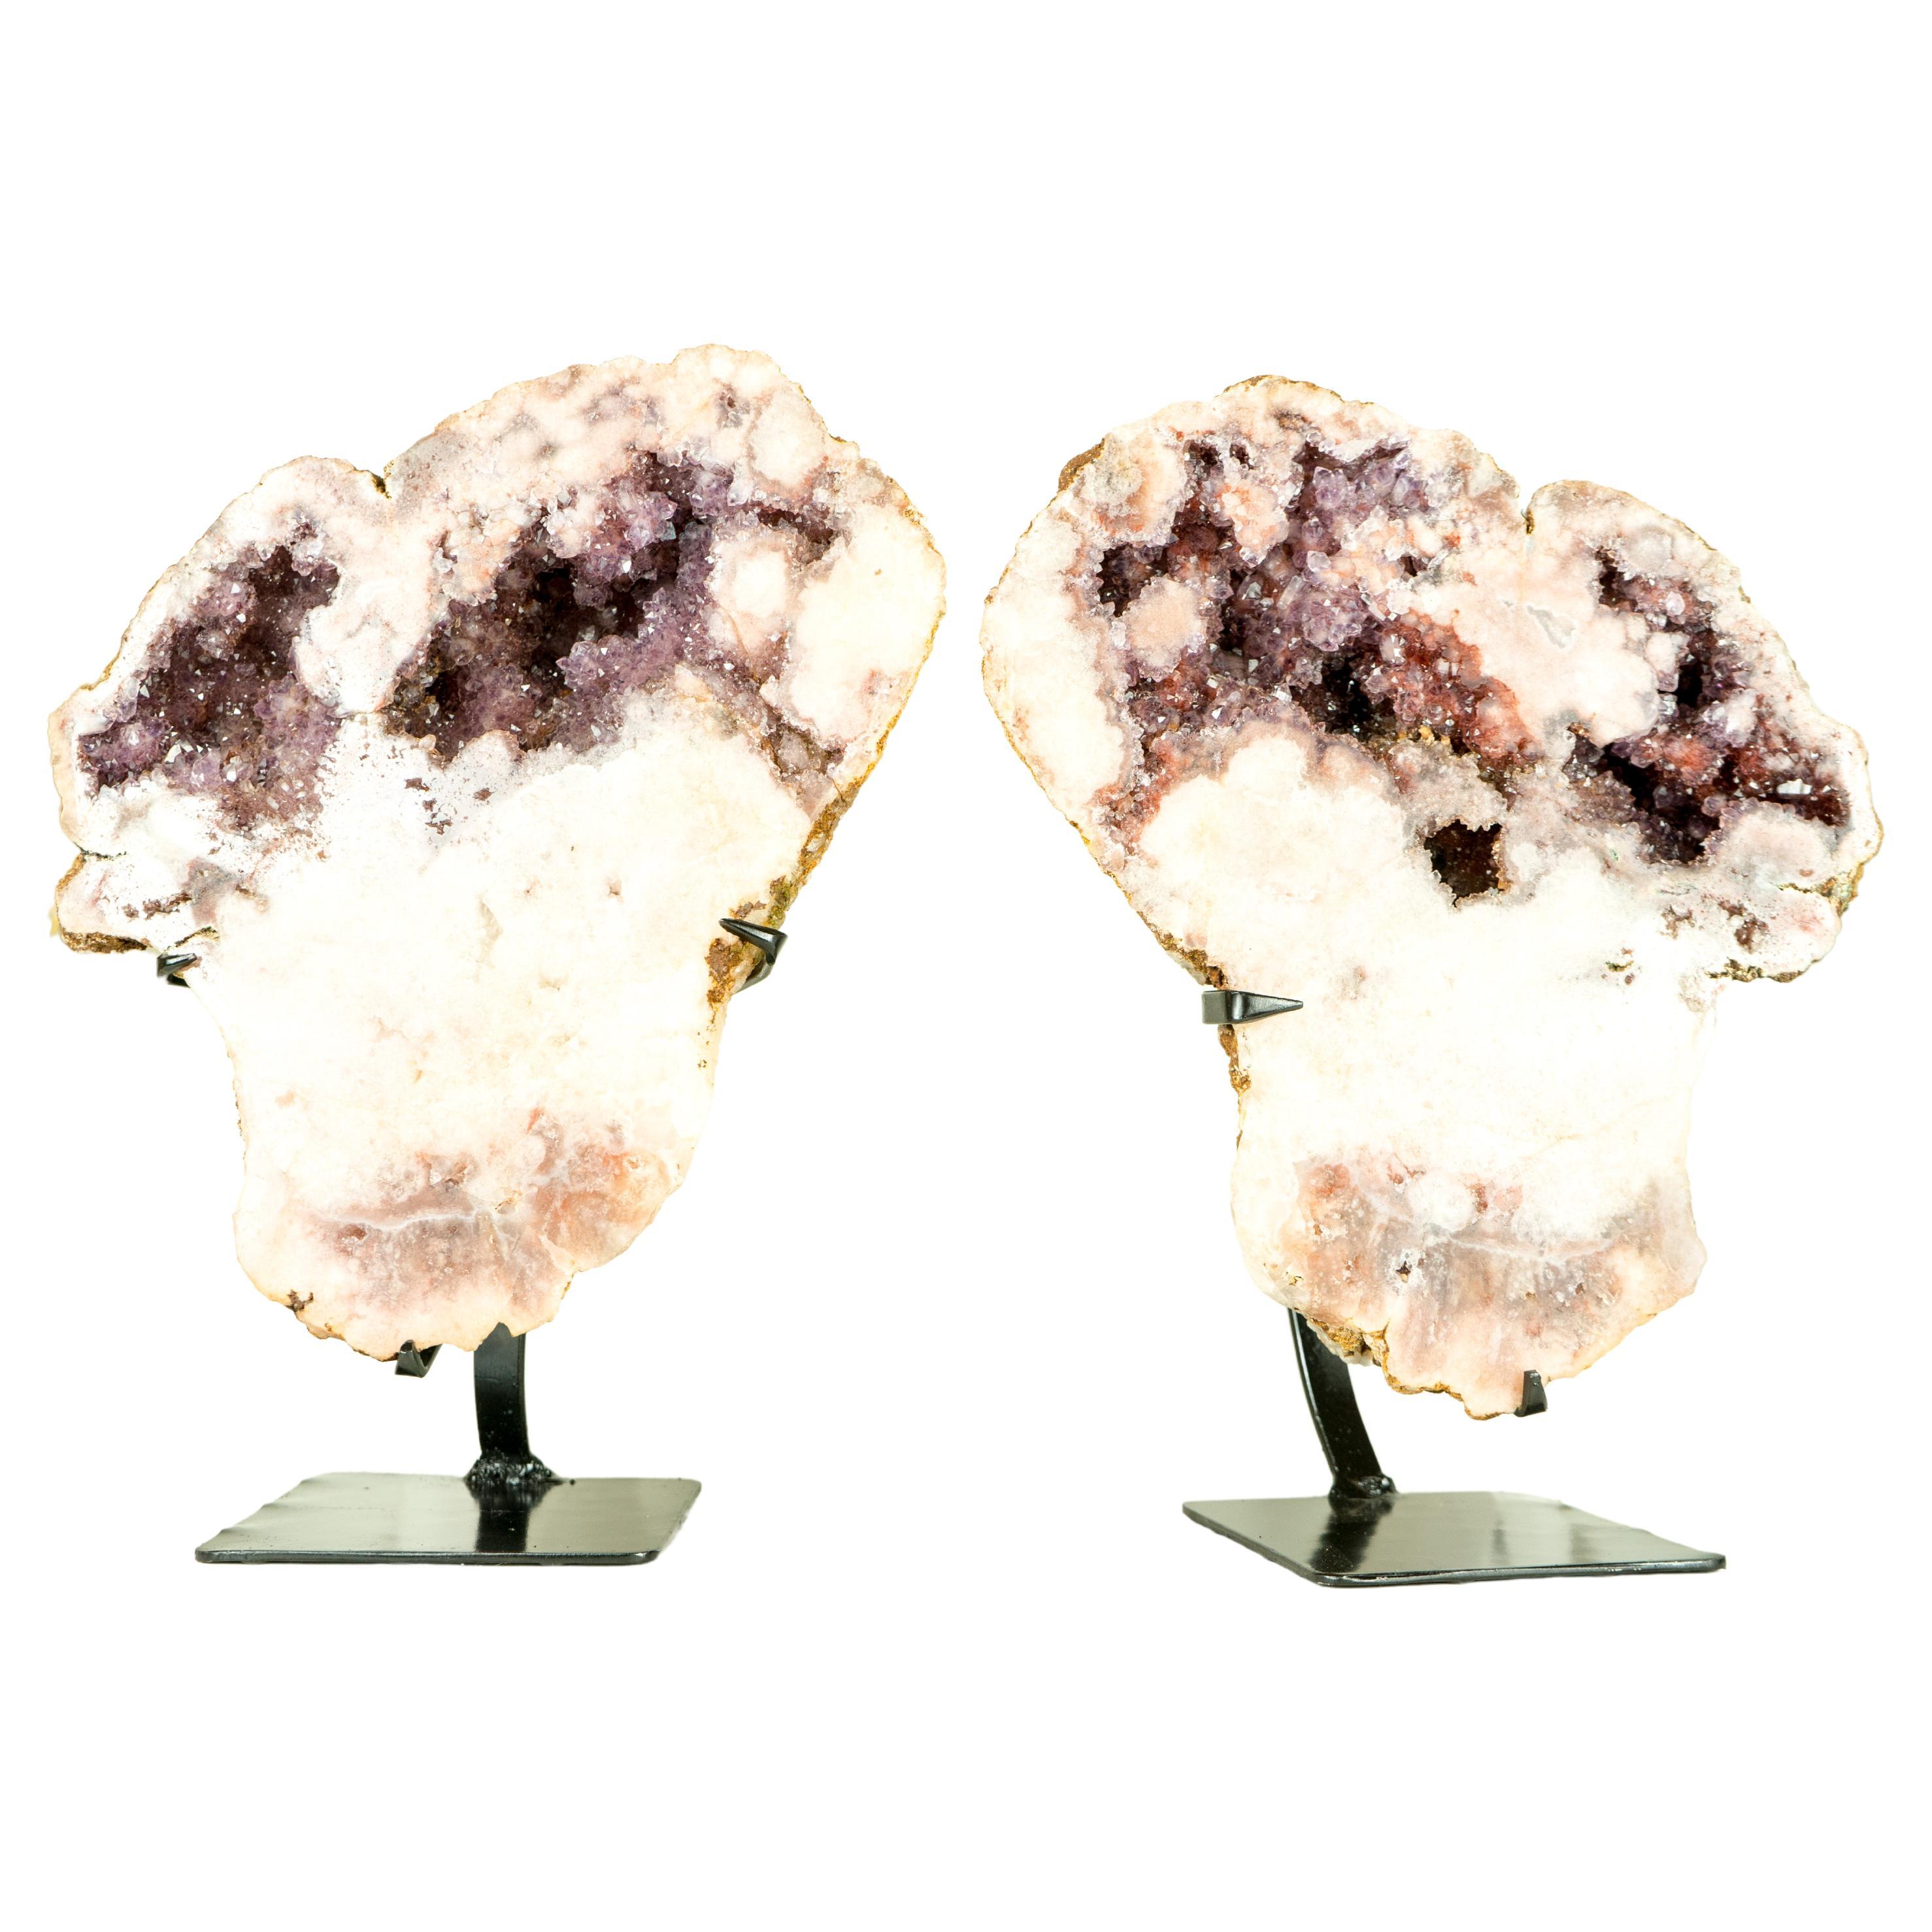 Rare Pair of All-Natural Pink Amethyst Geodes with Red and Lavender Amethyst